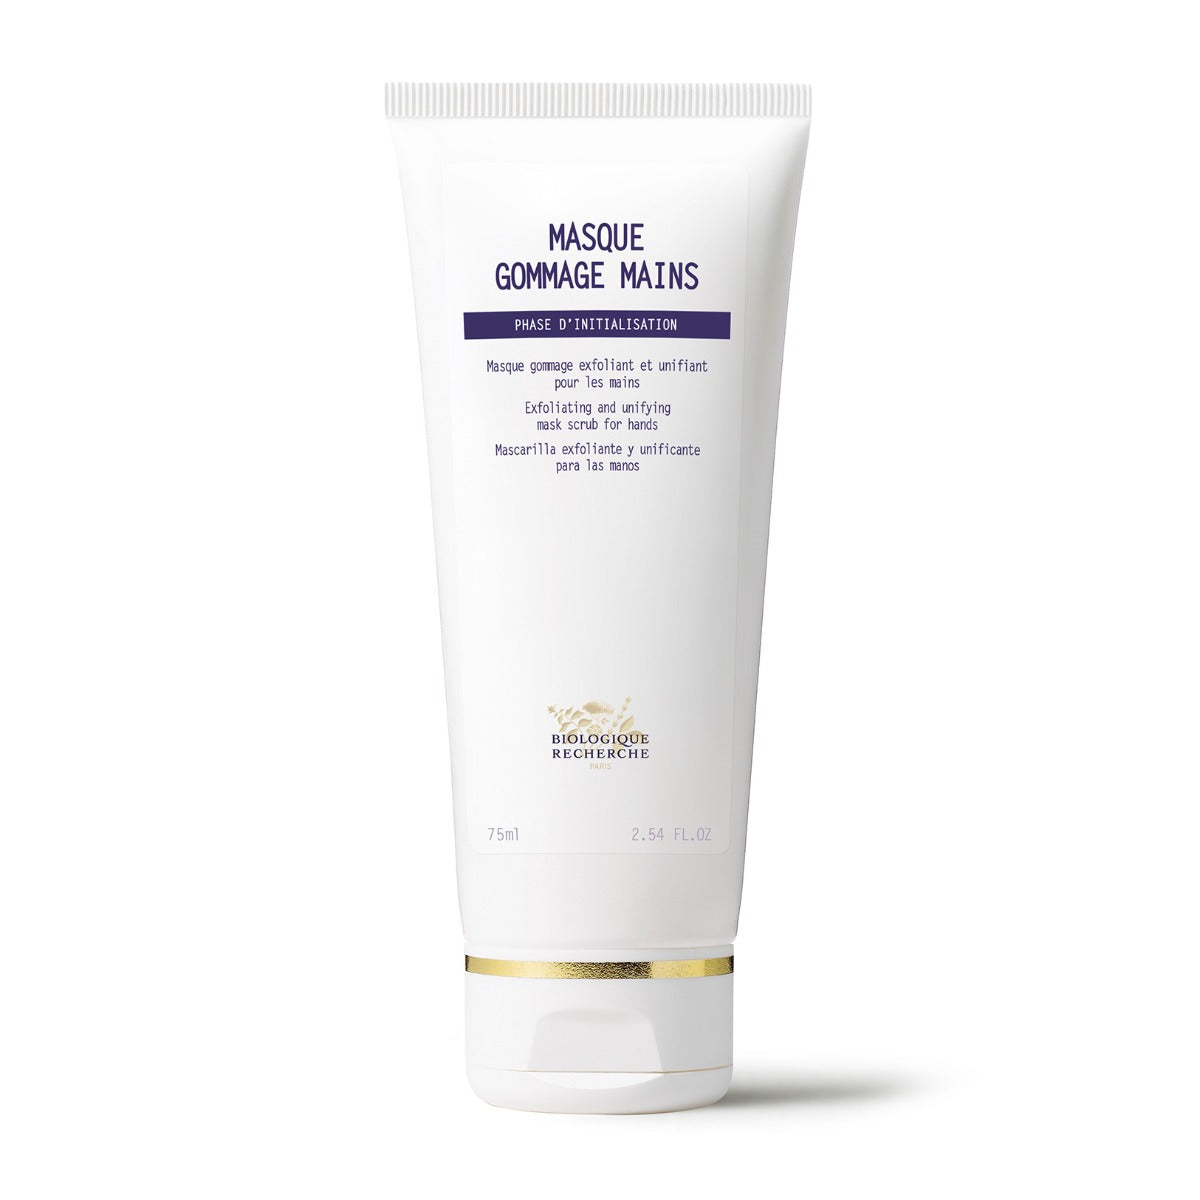 Masque Gommage Mains Unifying and Hydrating Mask